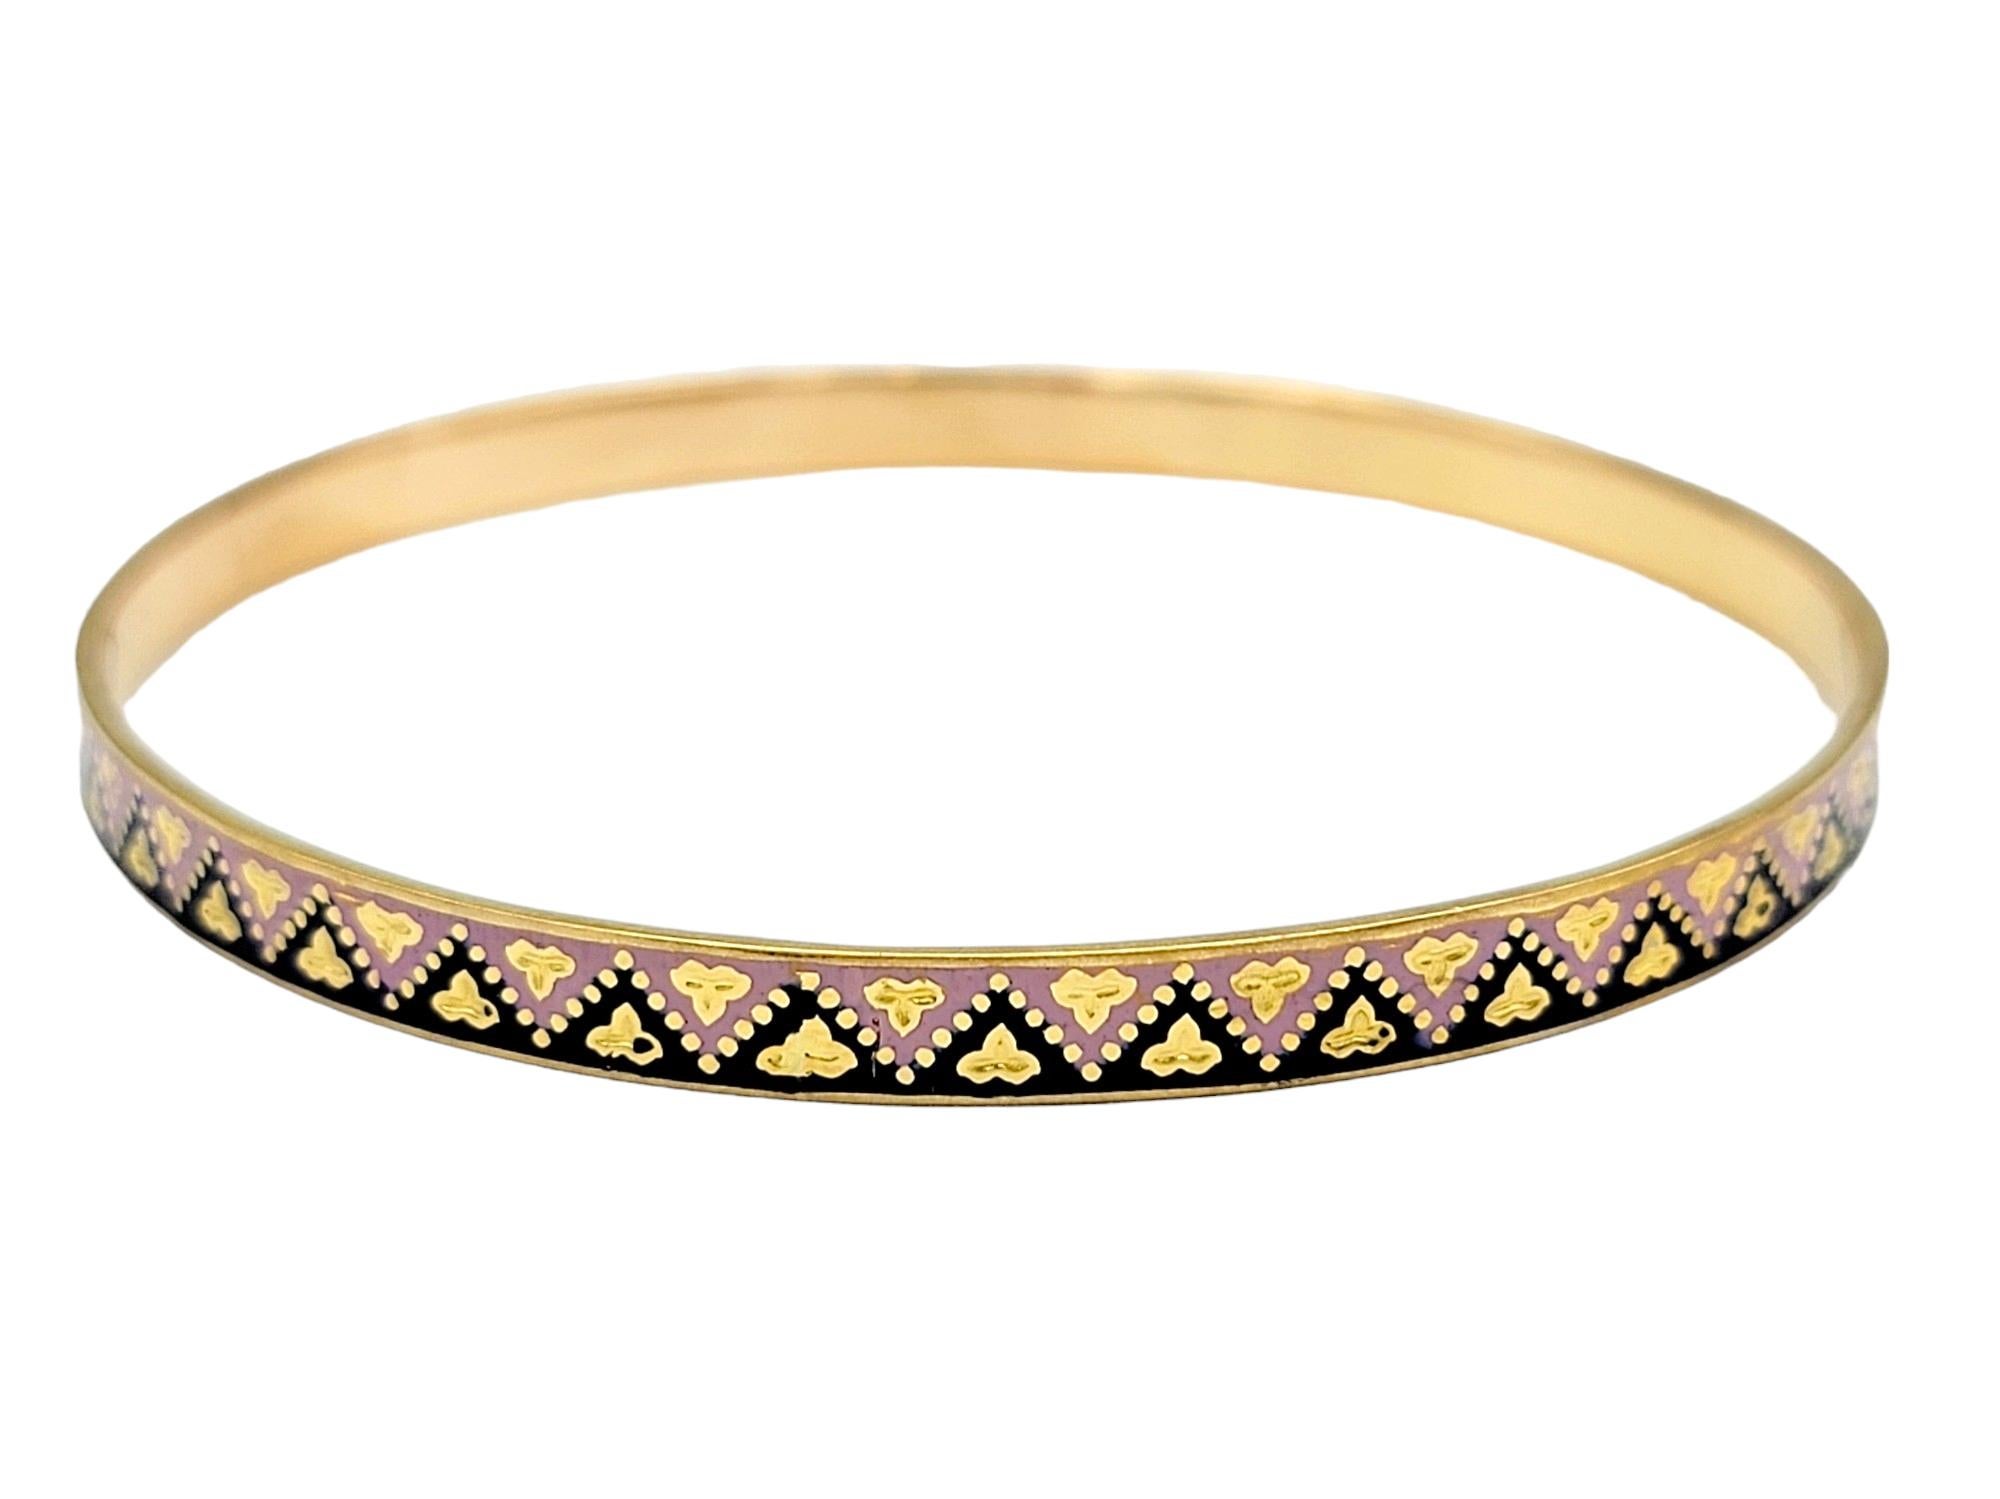 Introducing a stunning bangle bracelet crafted in luxurious 22 karat yellow gold, exuding opulence and sophistication. This exquisite piece features a captivating design with an alternating light pink and dark blue zigzag pattern adorning the entire